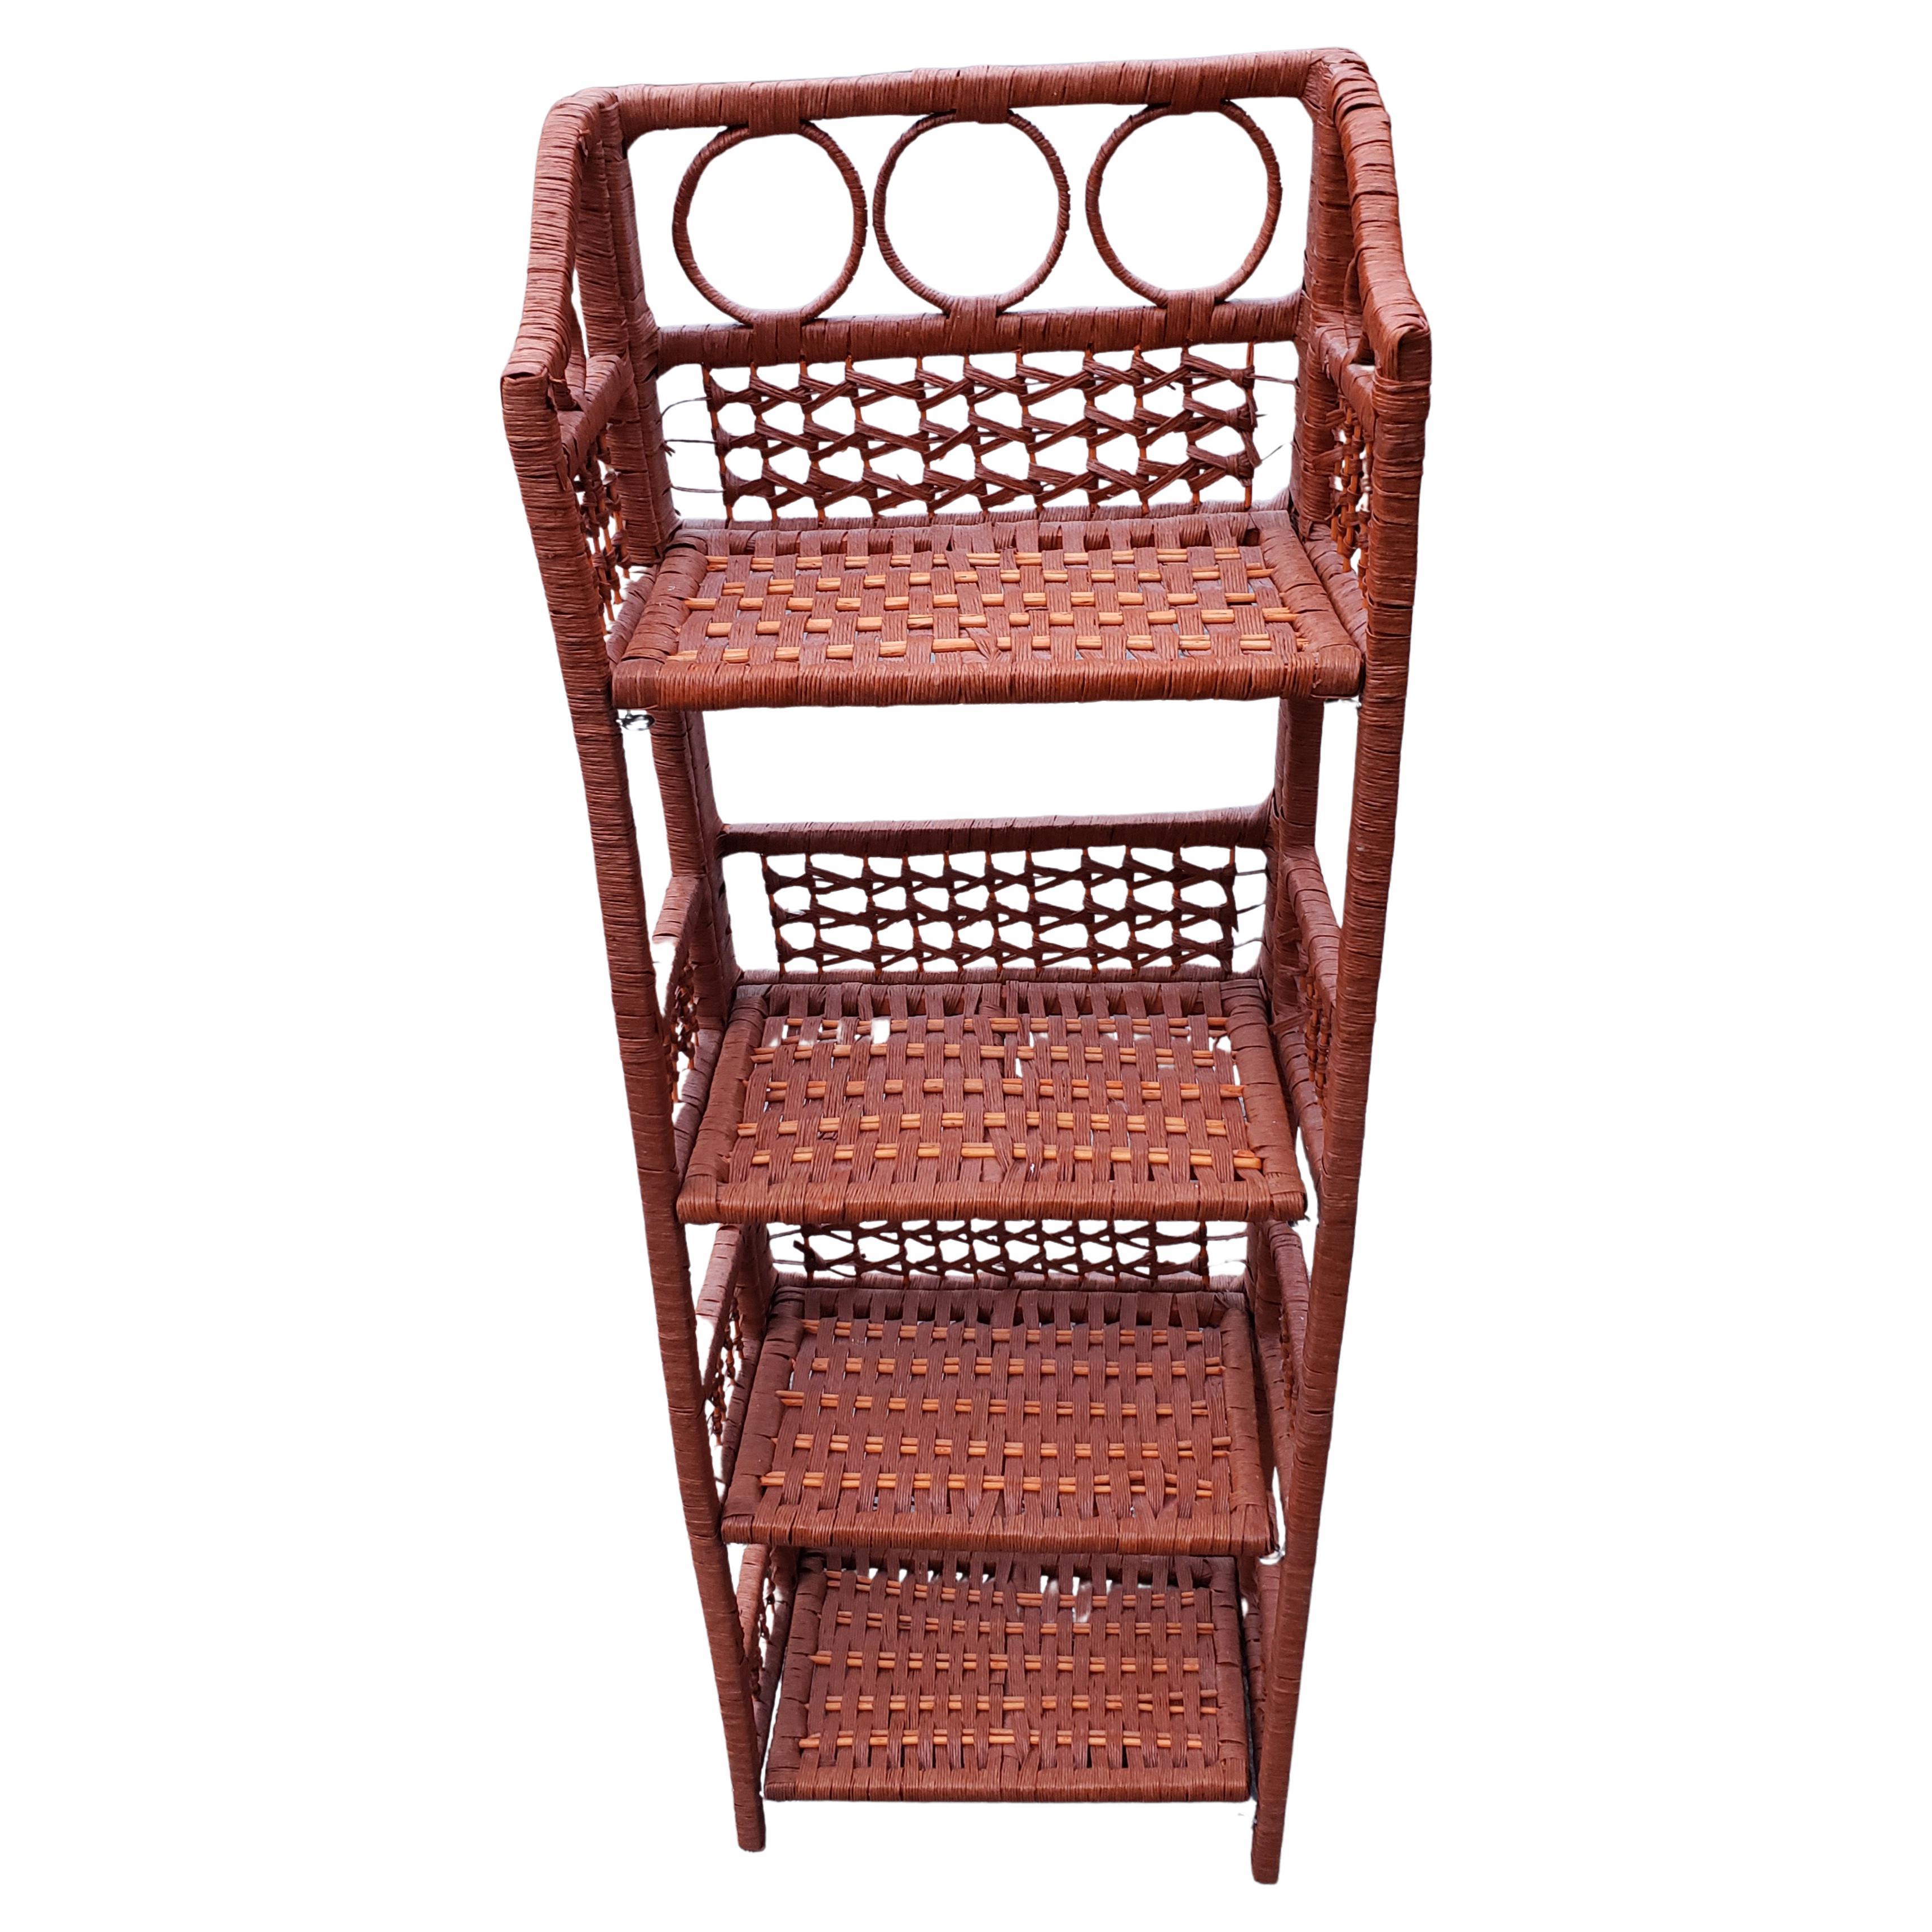 Hand-Crafted Vintage Wicker 4 Shelves Folding Etagere For Sale